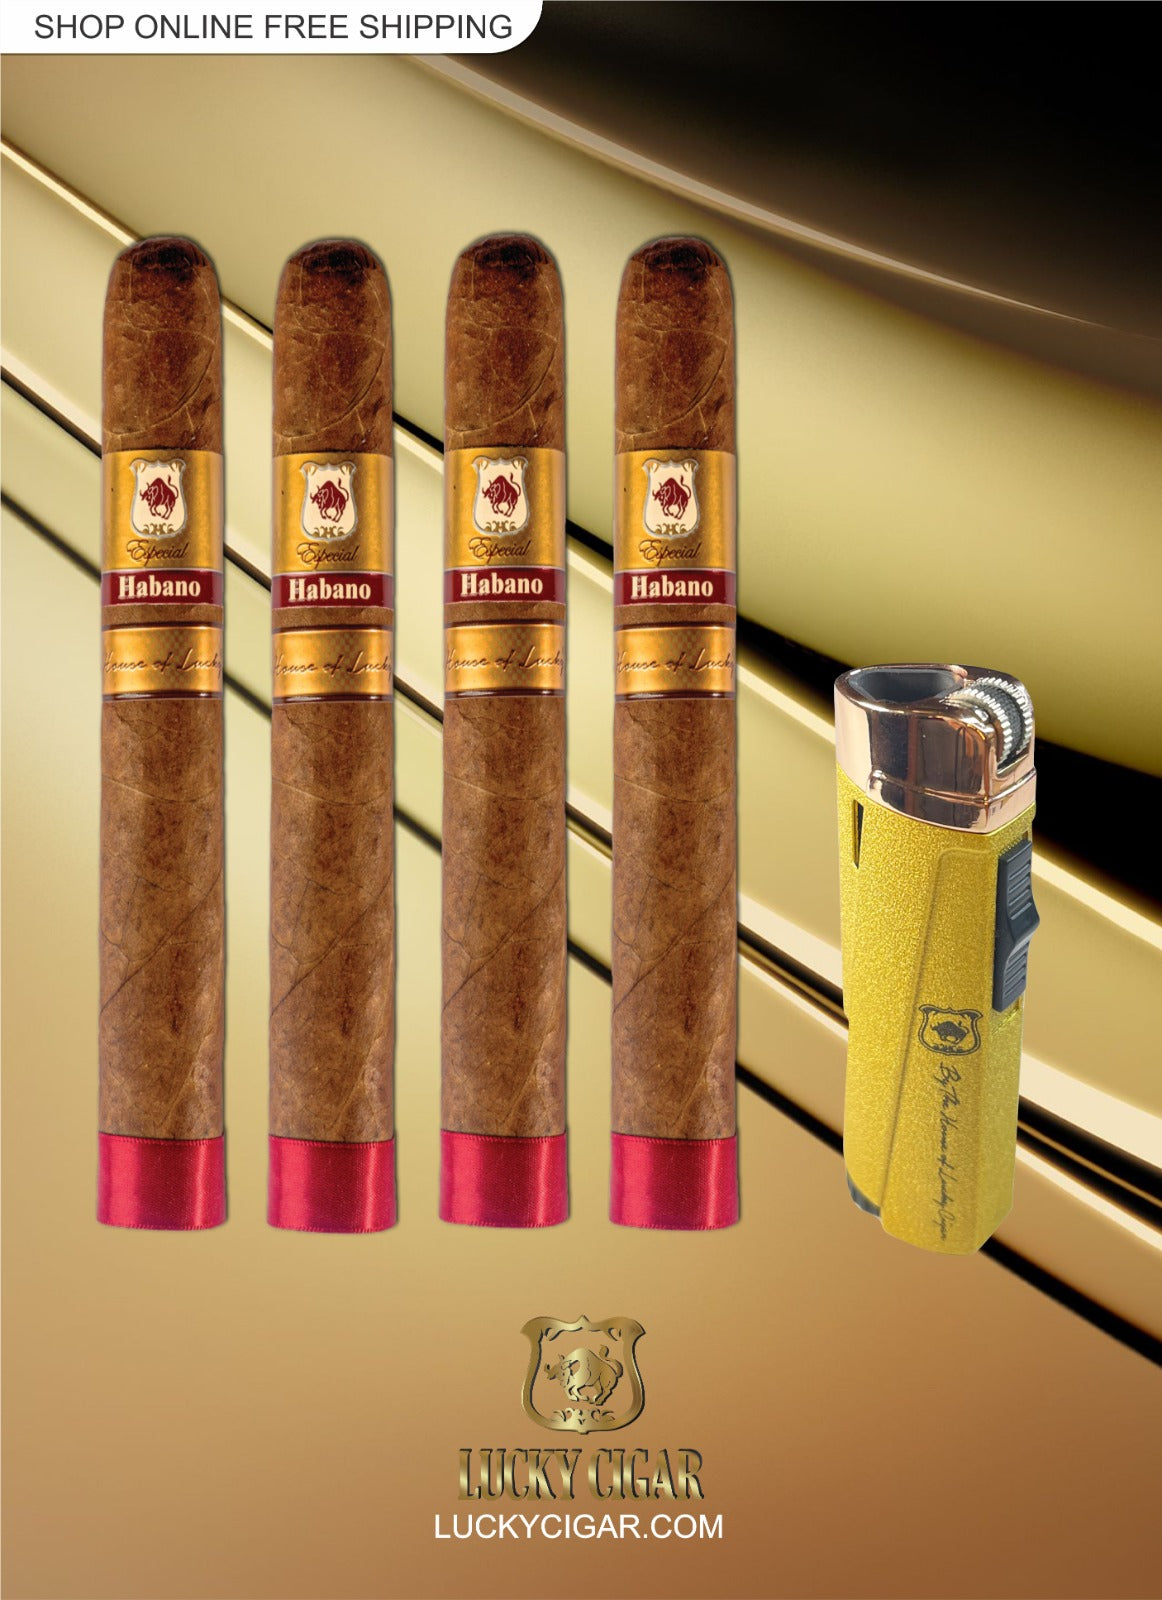 Habano Cigars: Especial Habano by Lucky Cigar: Set of 4 Cigars, 4 Toro with Lighter Yellow